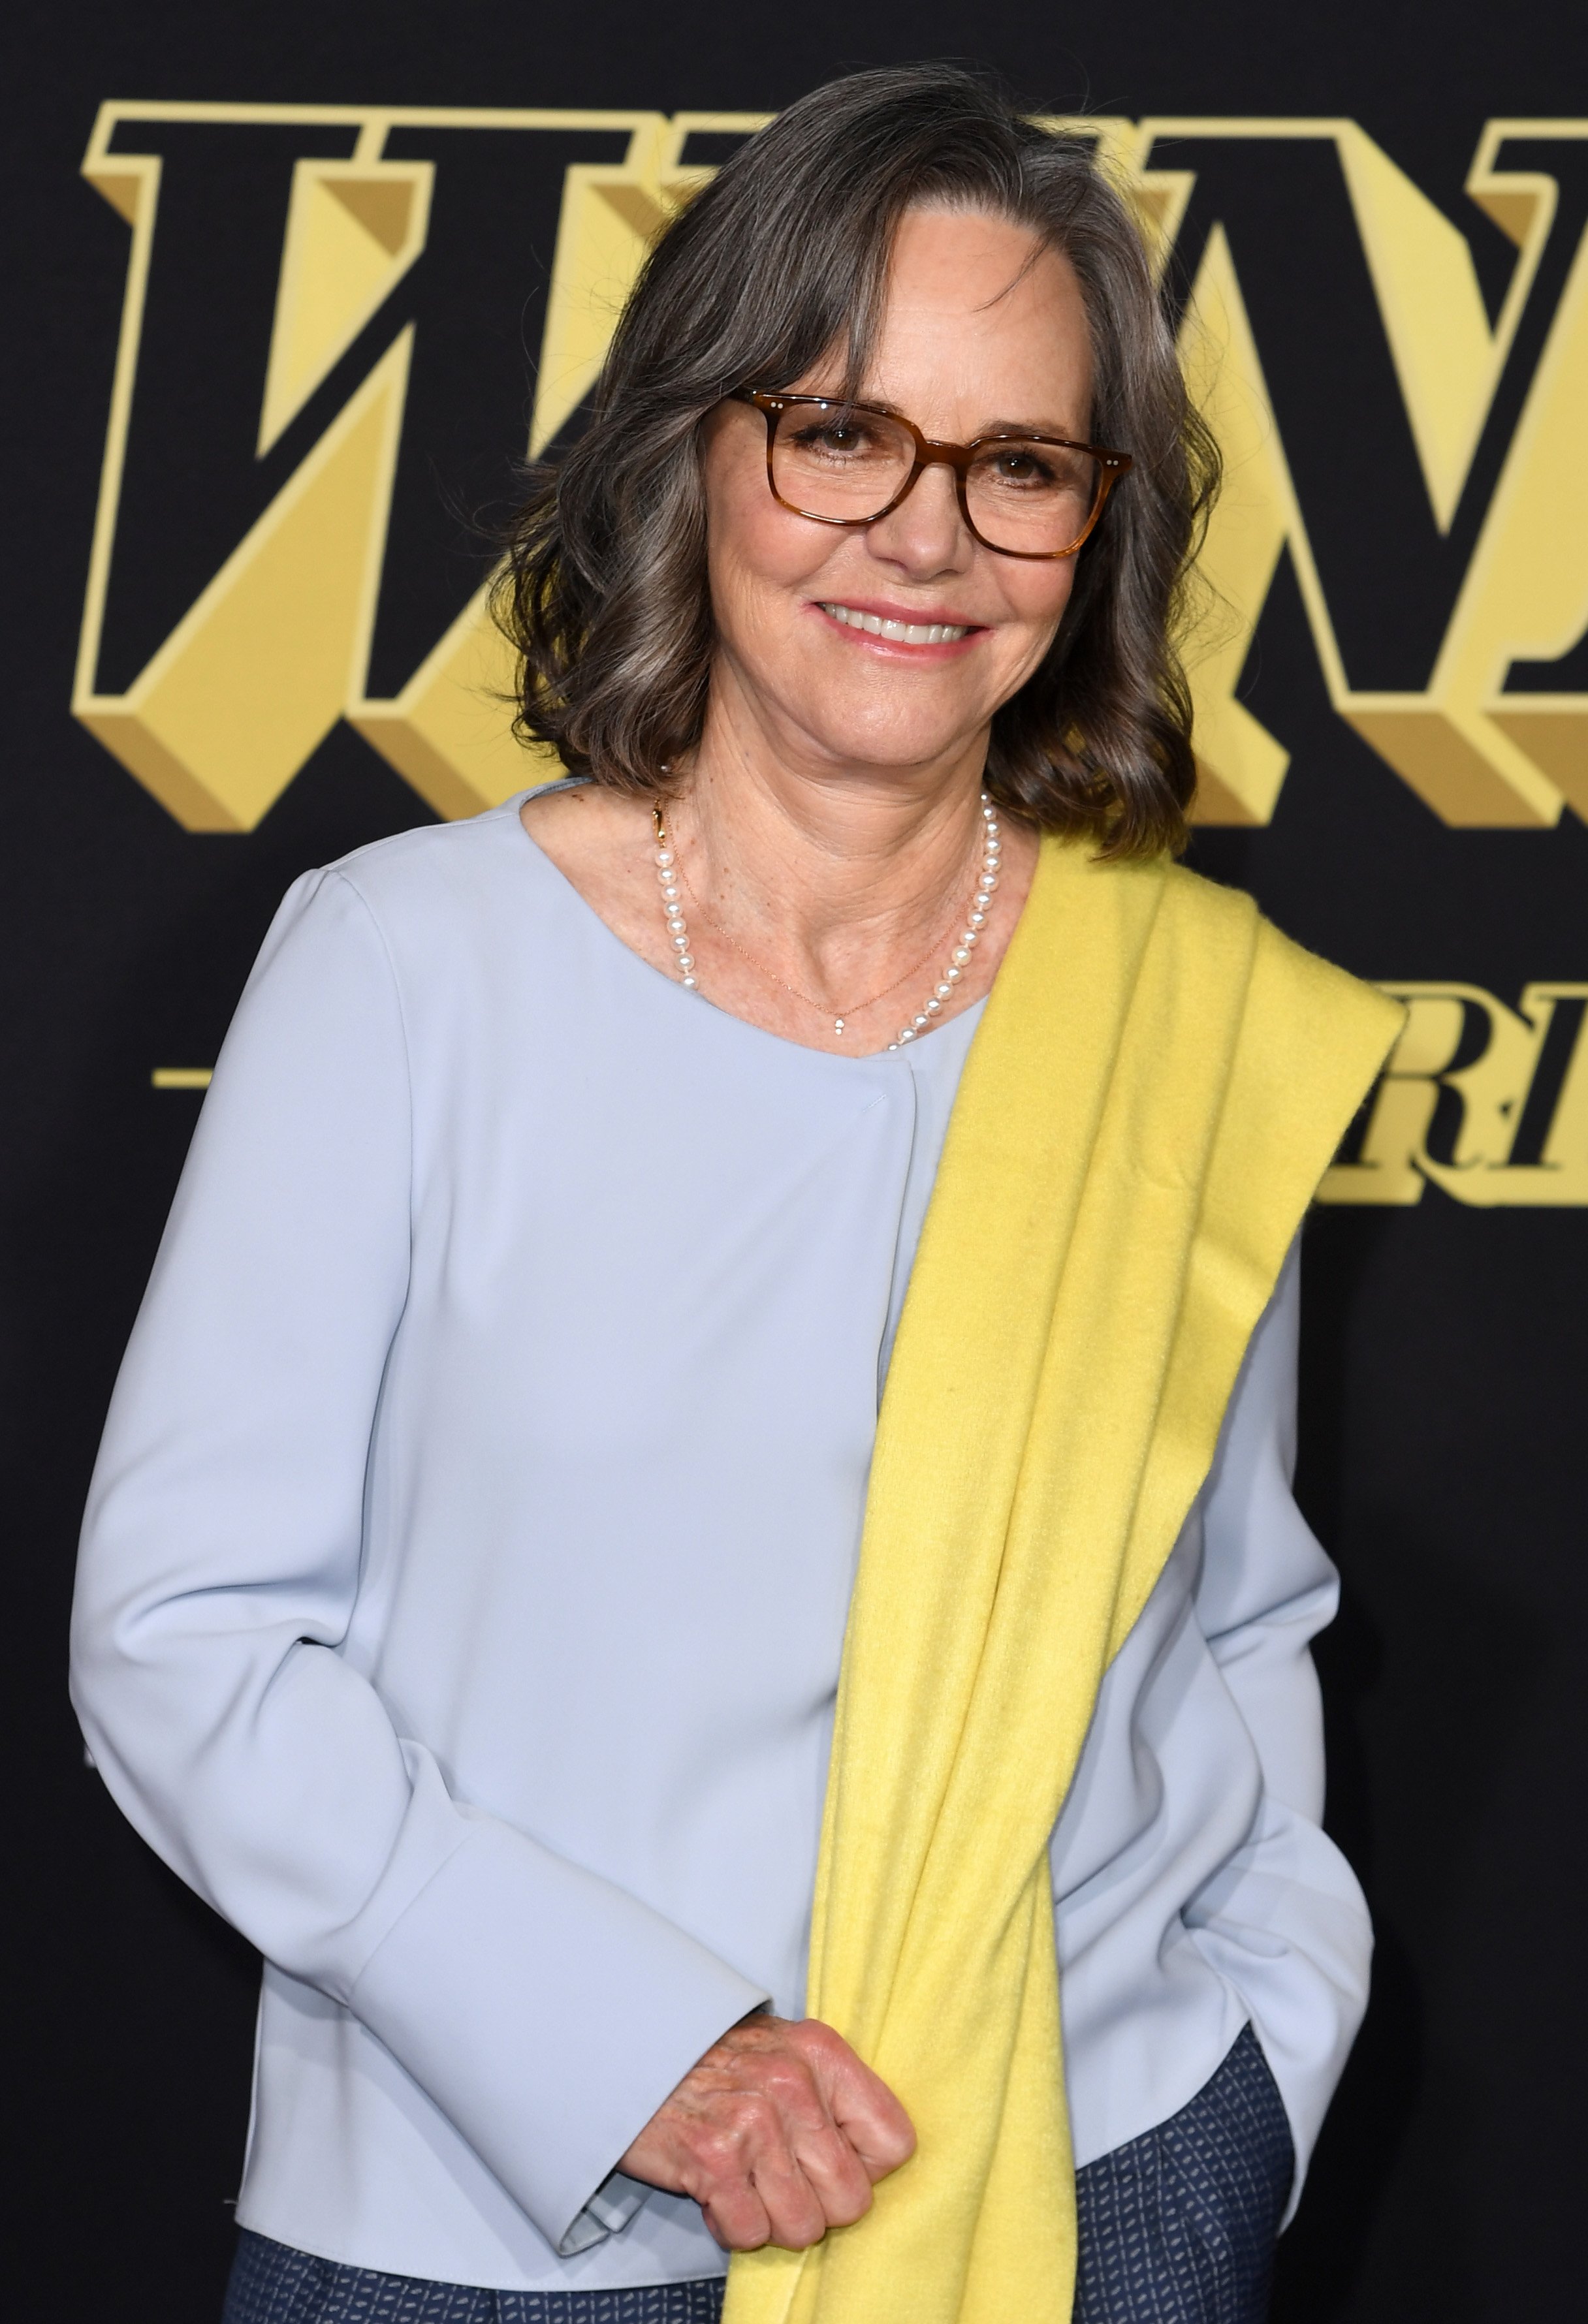 Sally Field at the premiere of "Winning Time: The Rise Of The Lakers Dynasty" on March 2, 2022, in Los Angeles, California | Source: Getty Images